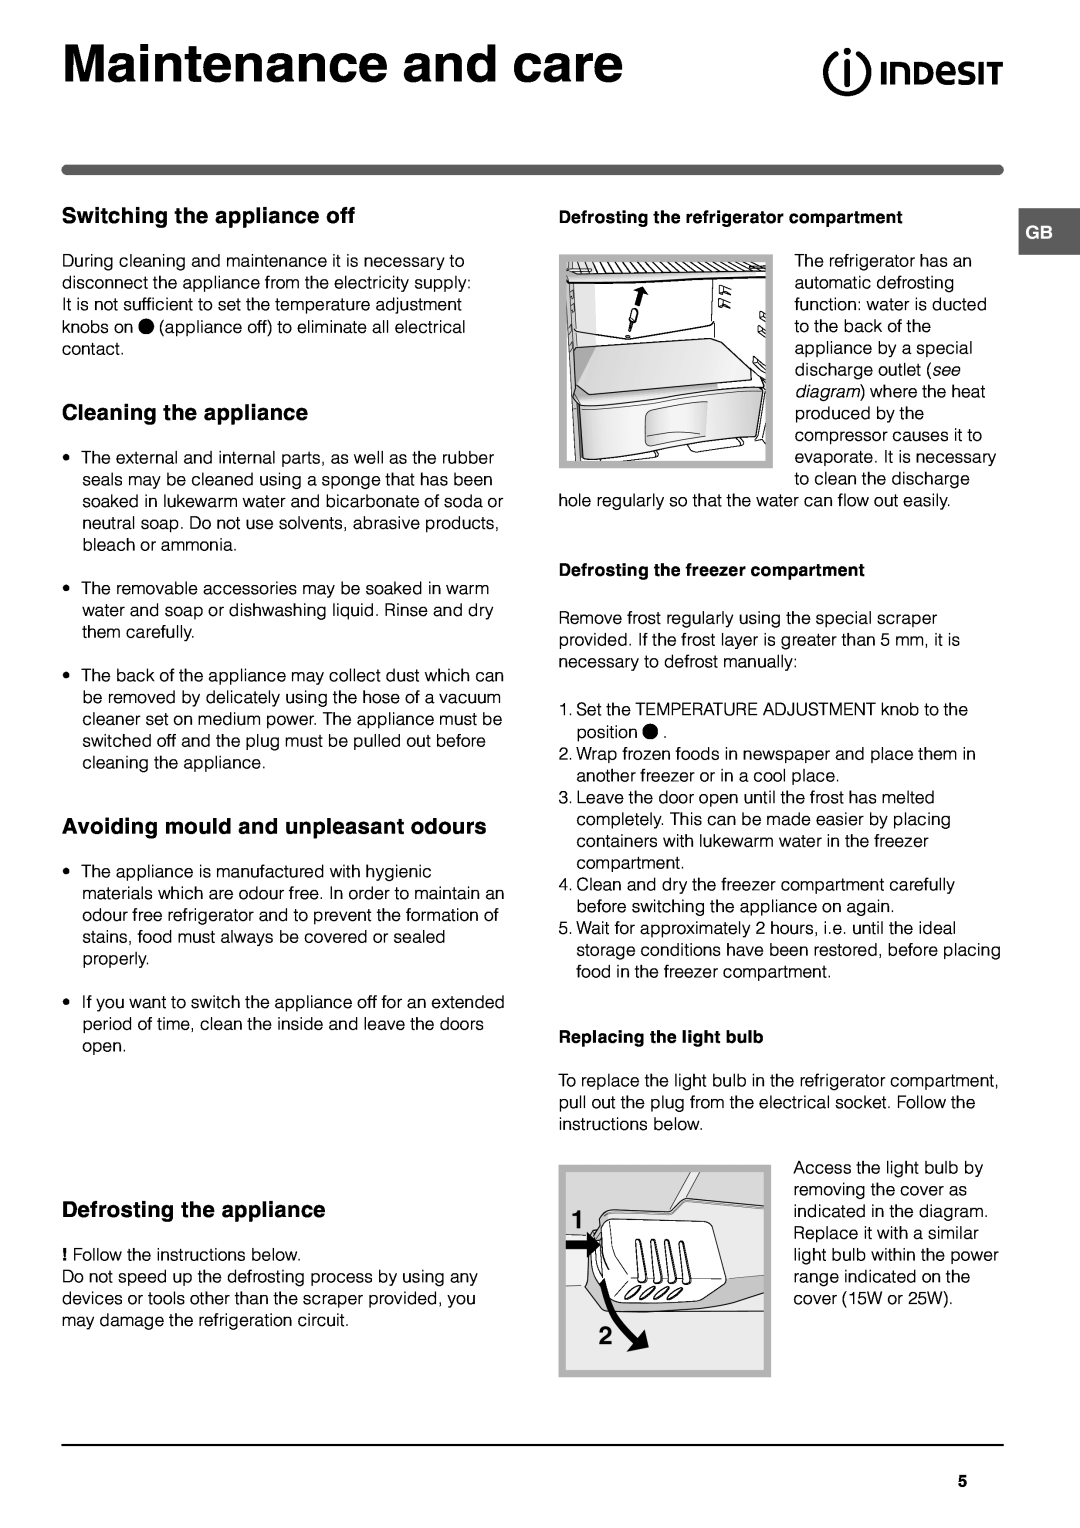 Indesit RA 24I S manual Maintenance and care, Switching the appliance off, Cleaning the appliance, Defrosting the appliance 